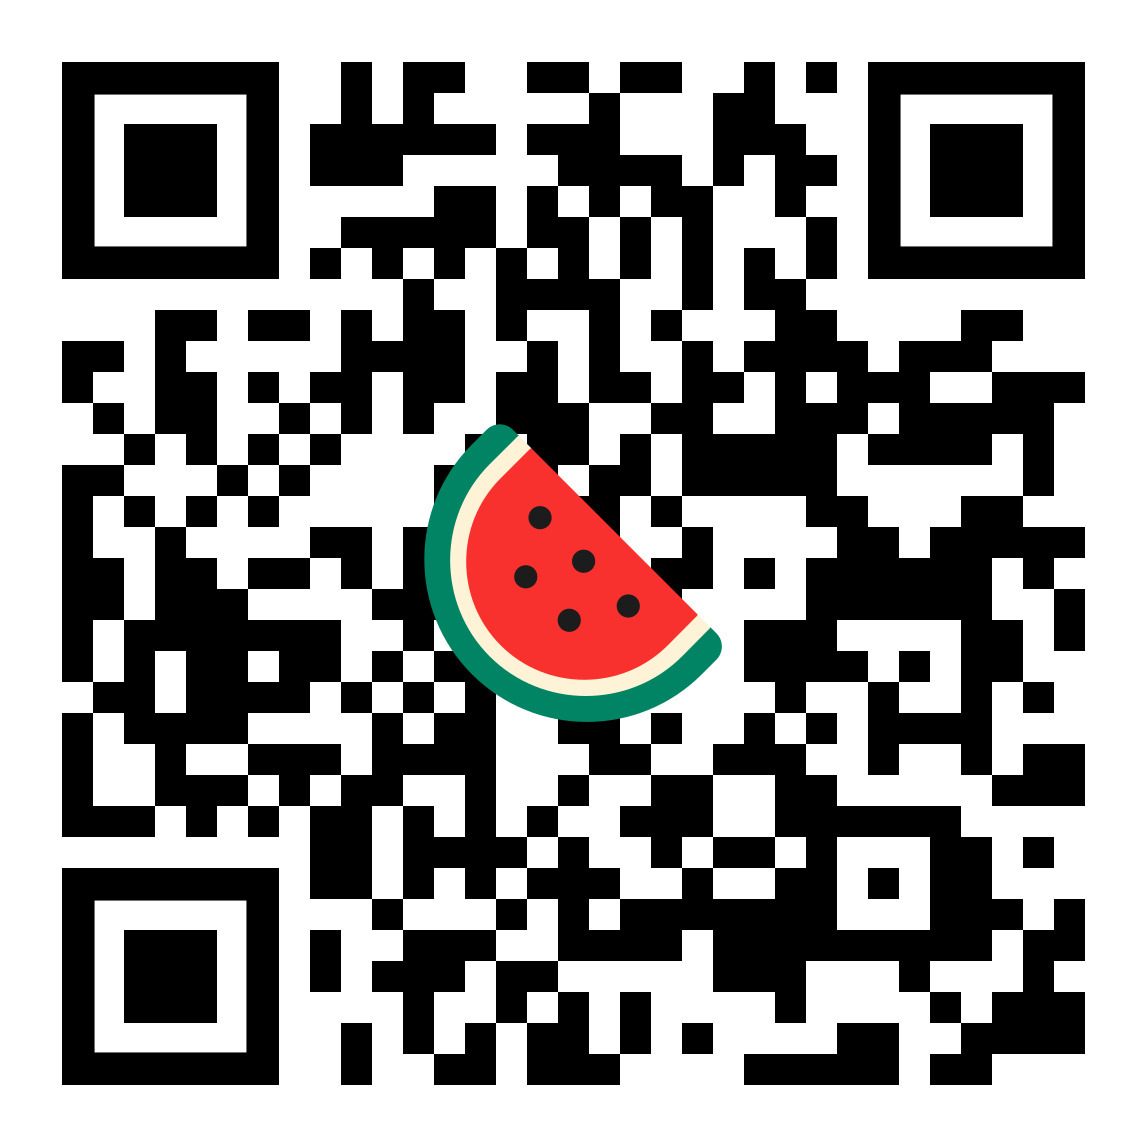 QR code with watermelon icon in center